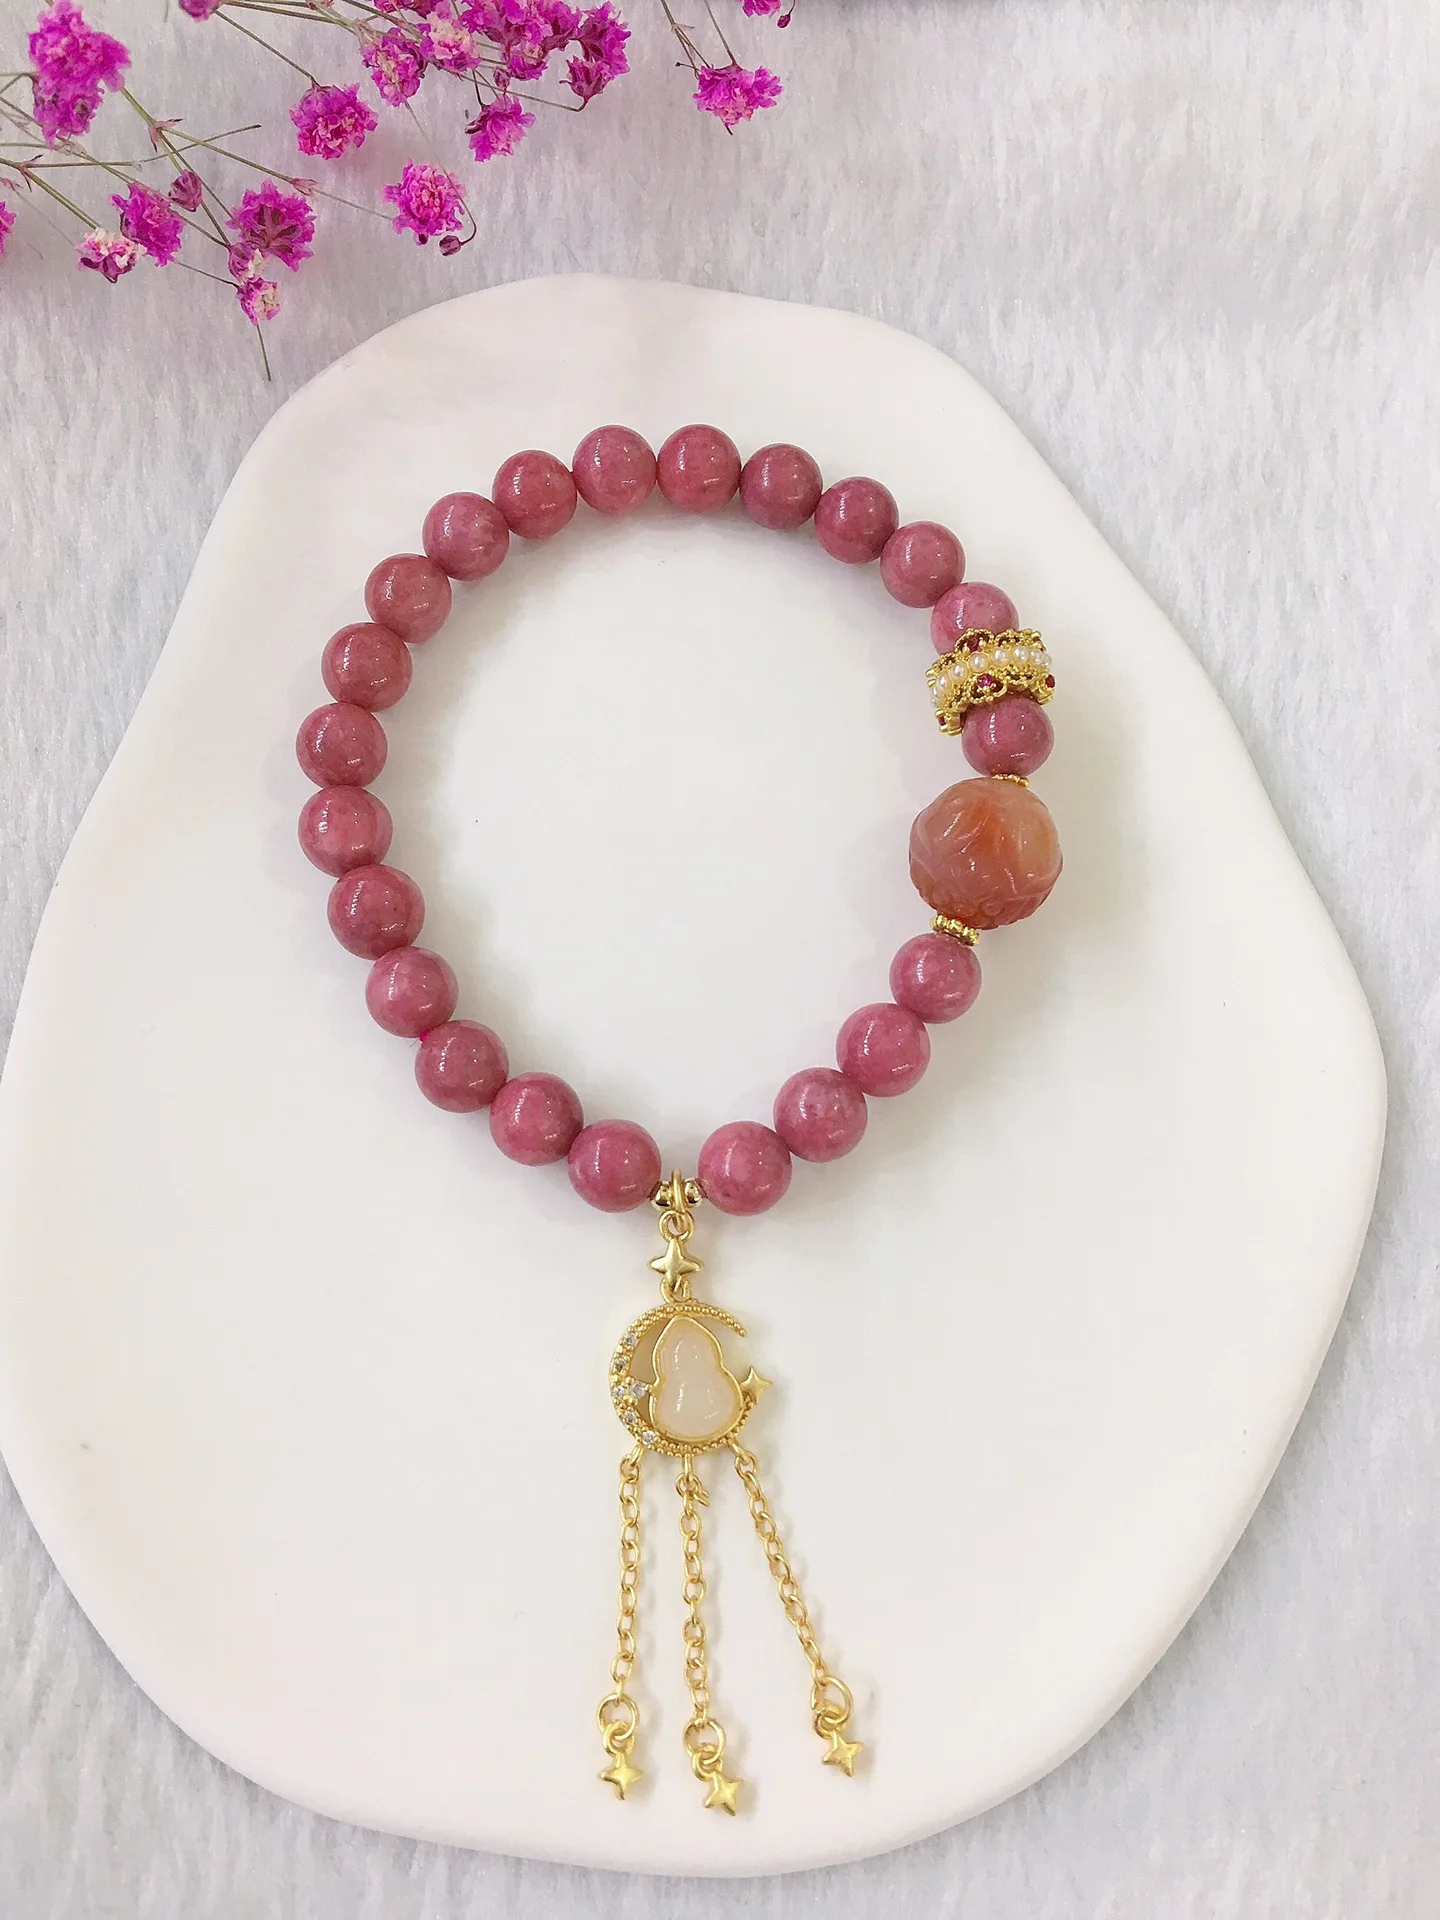 

Bracelets With Natural Stones Jewelry For Women Rose Pink Beads Gold Pendant Christmas 2023 Novelty Gift For Girlfriend